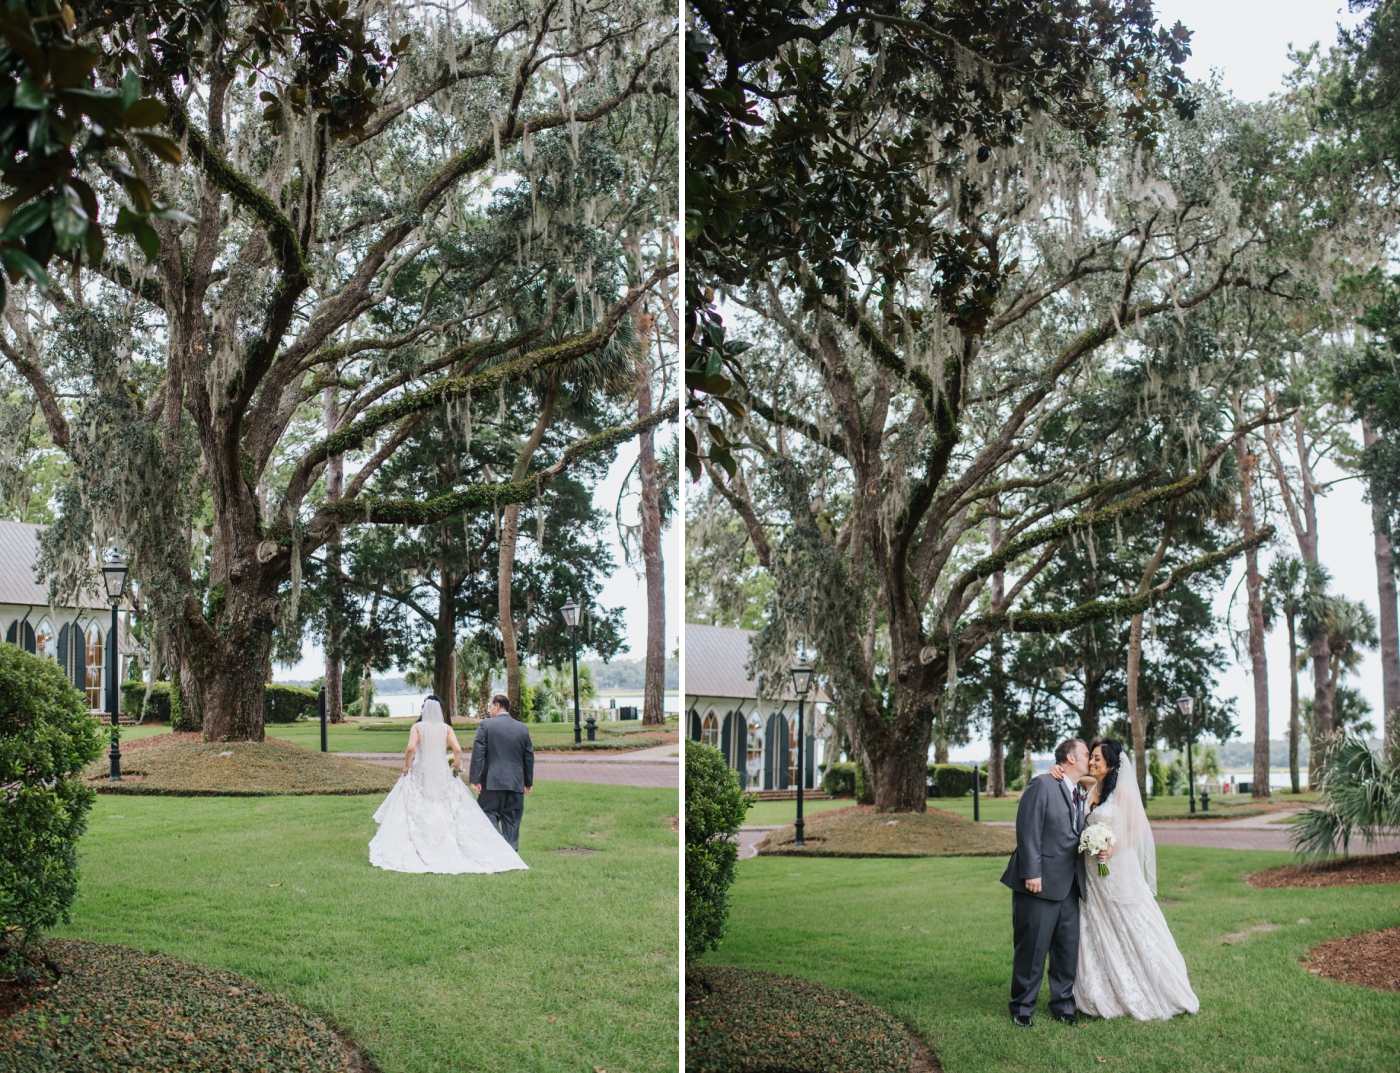 Amy and Jeff’s fall wedding at Palmetto Bluff in South Carolina